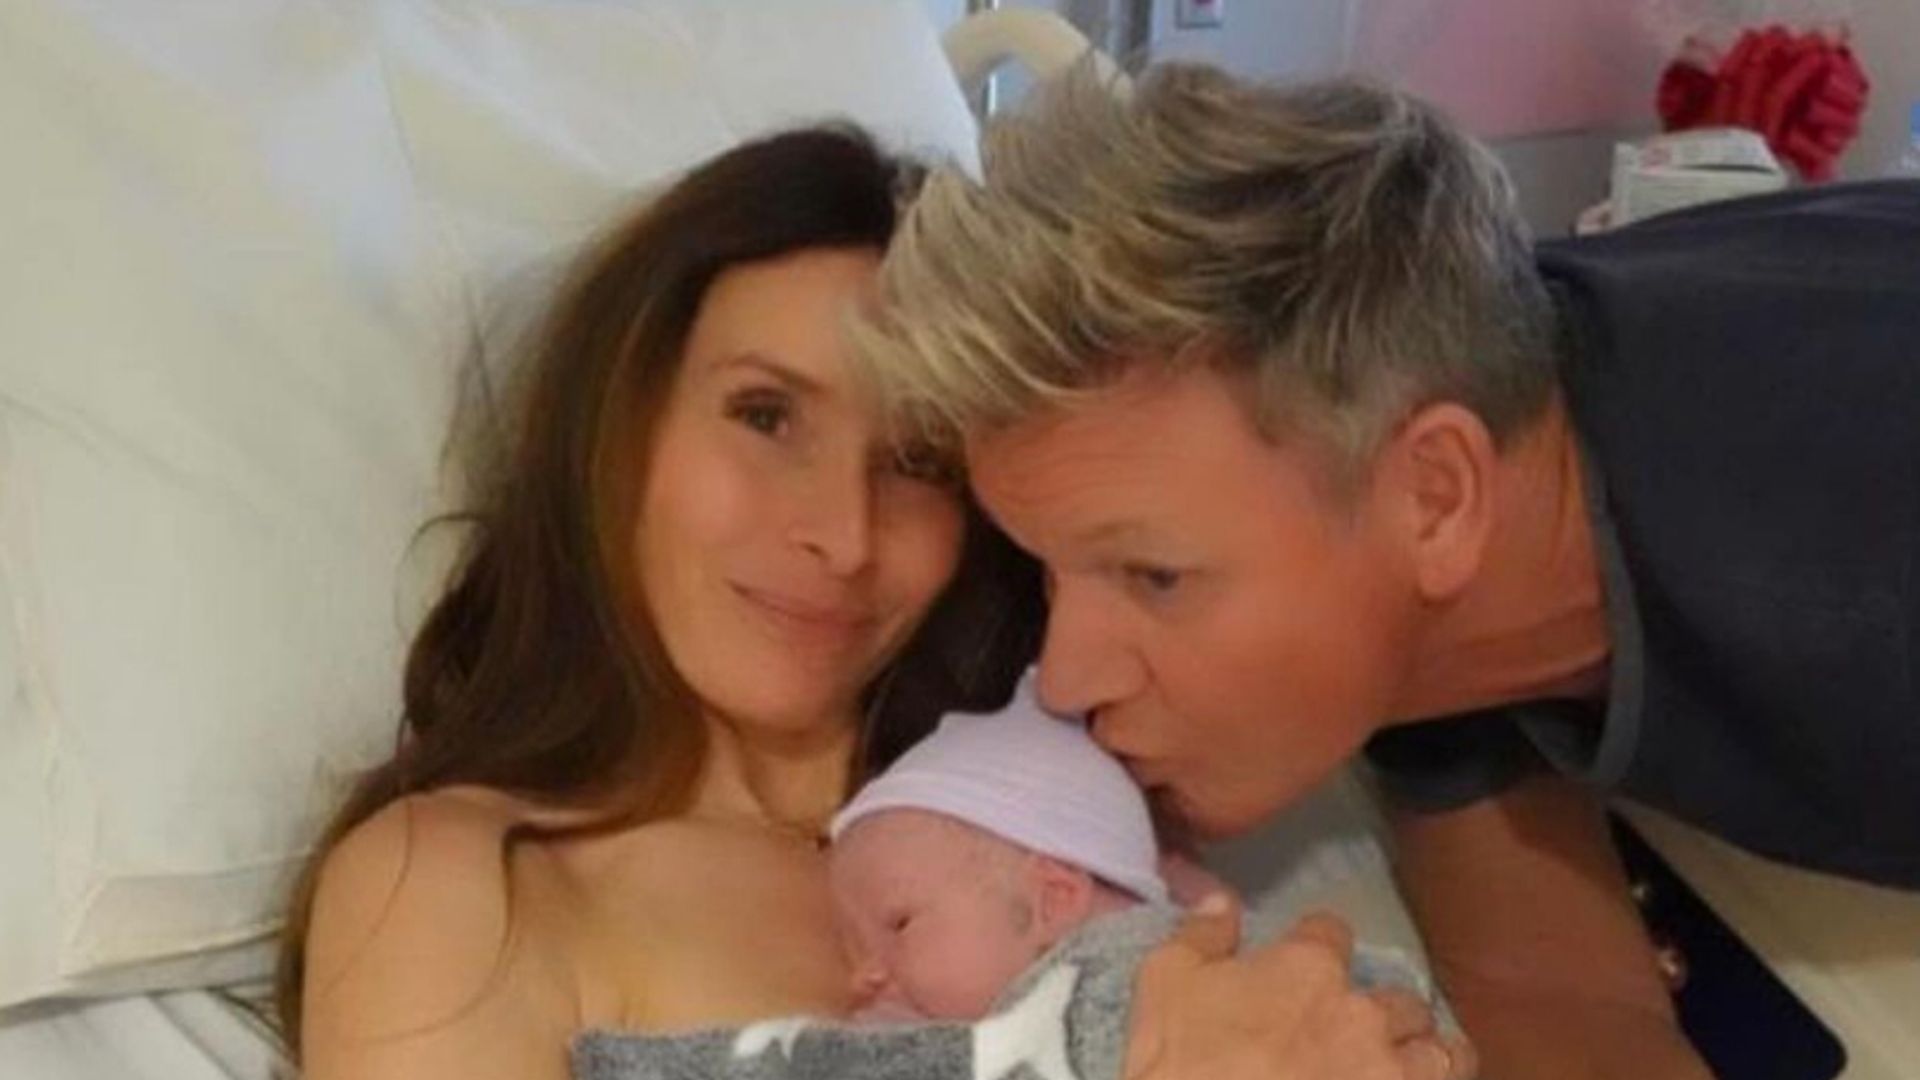 Tana Ramsay holding a newborn baby close to her chest as Gordon Ramsay kisses the baby's head